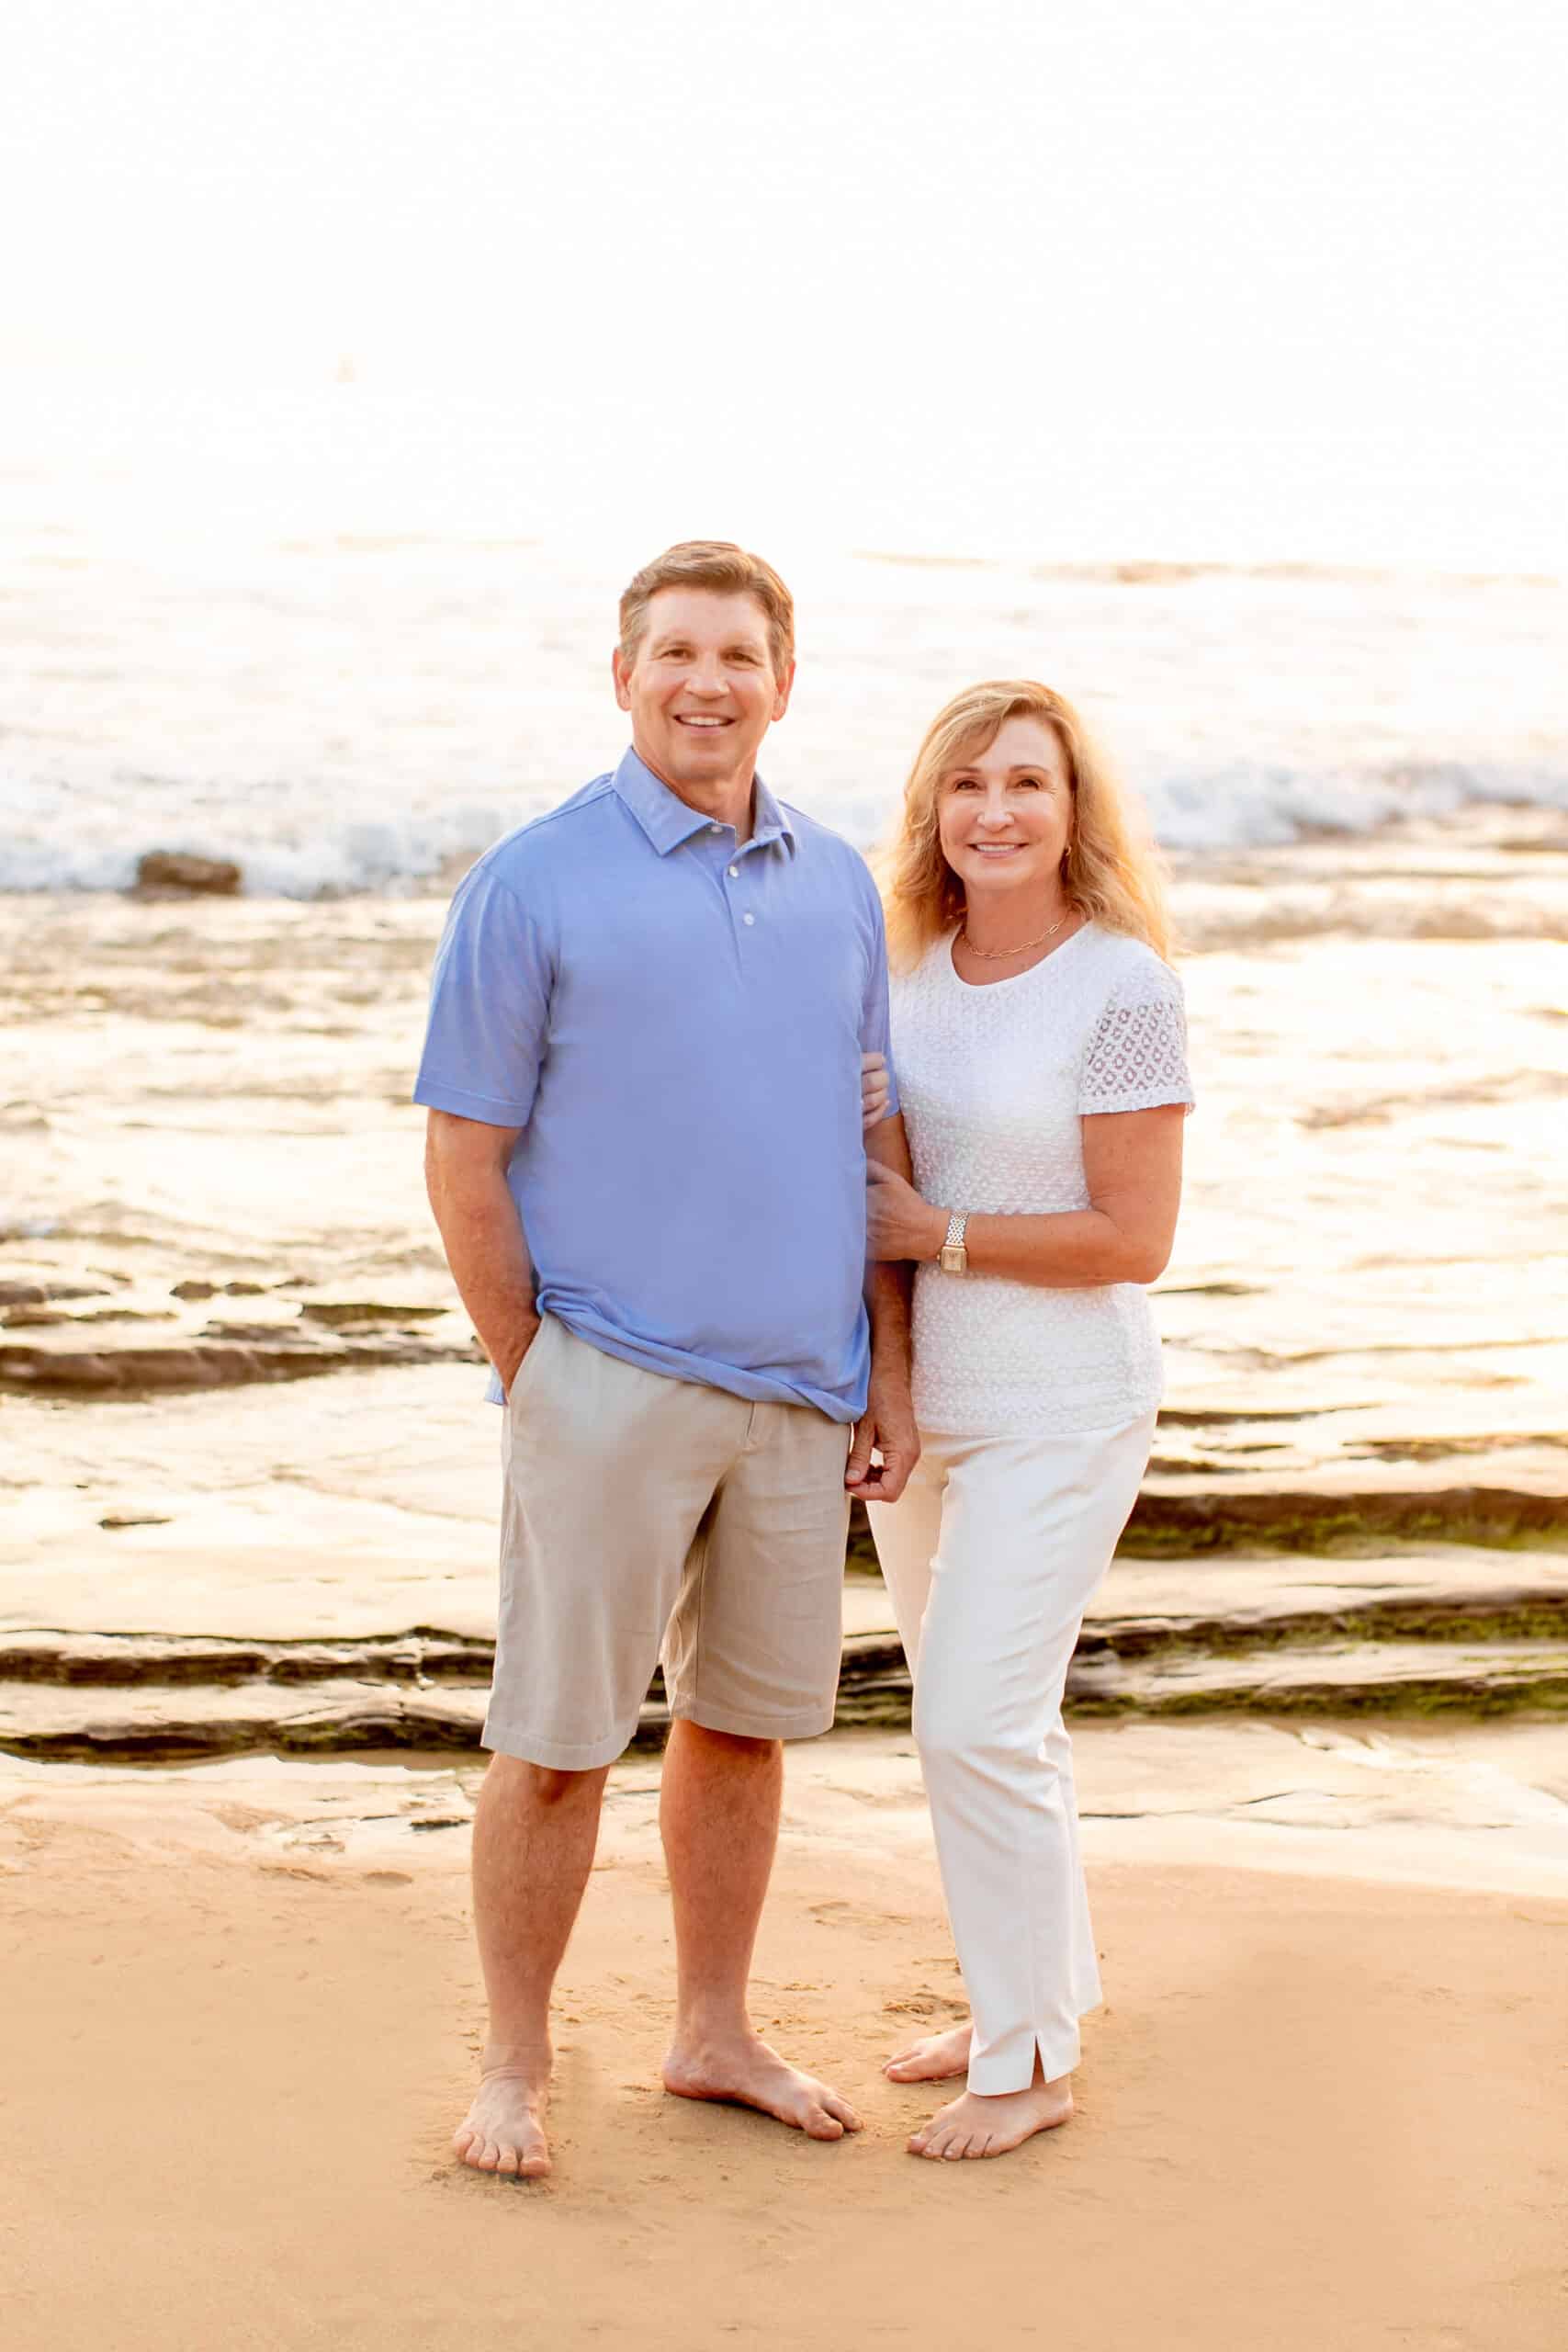 Lee Dove and his wife standing on the beach.